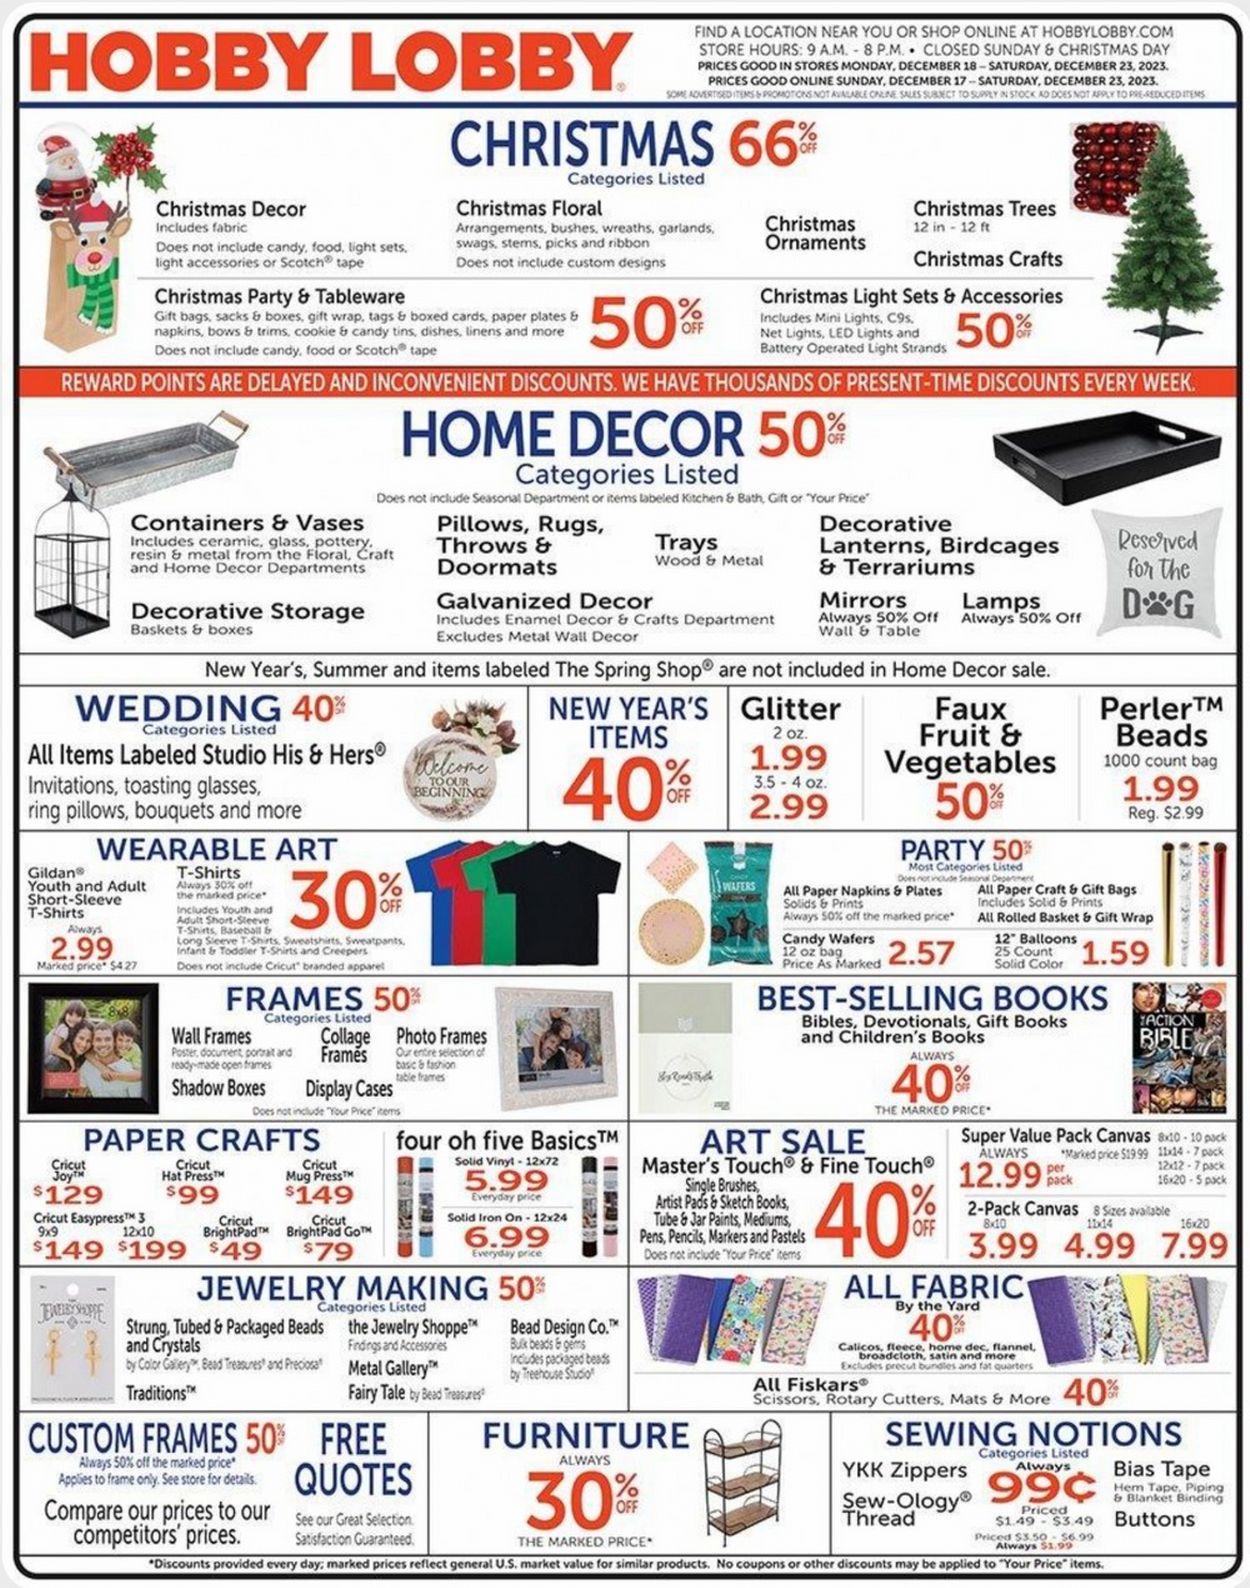 Hobby Lobby Christmas July 2024 Weekly Sales, Deals, Discounts and Digital Coupons.